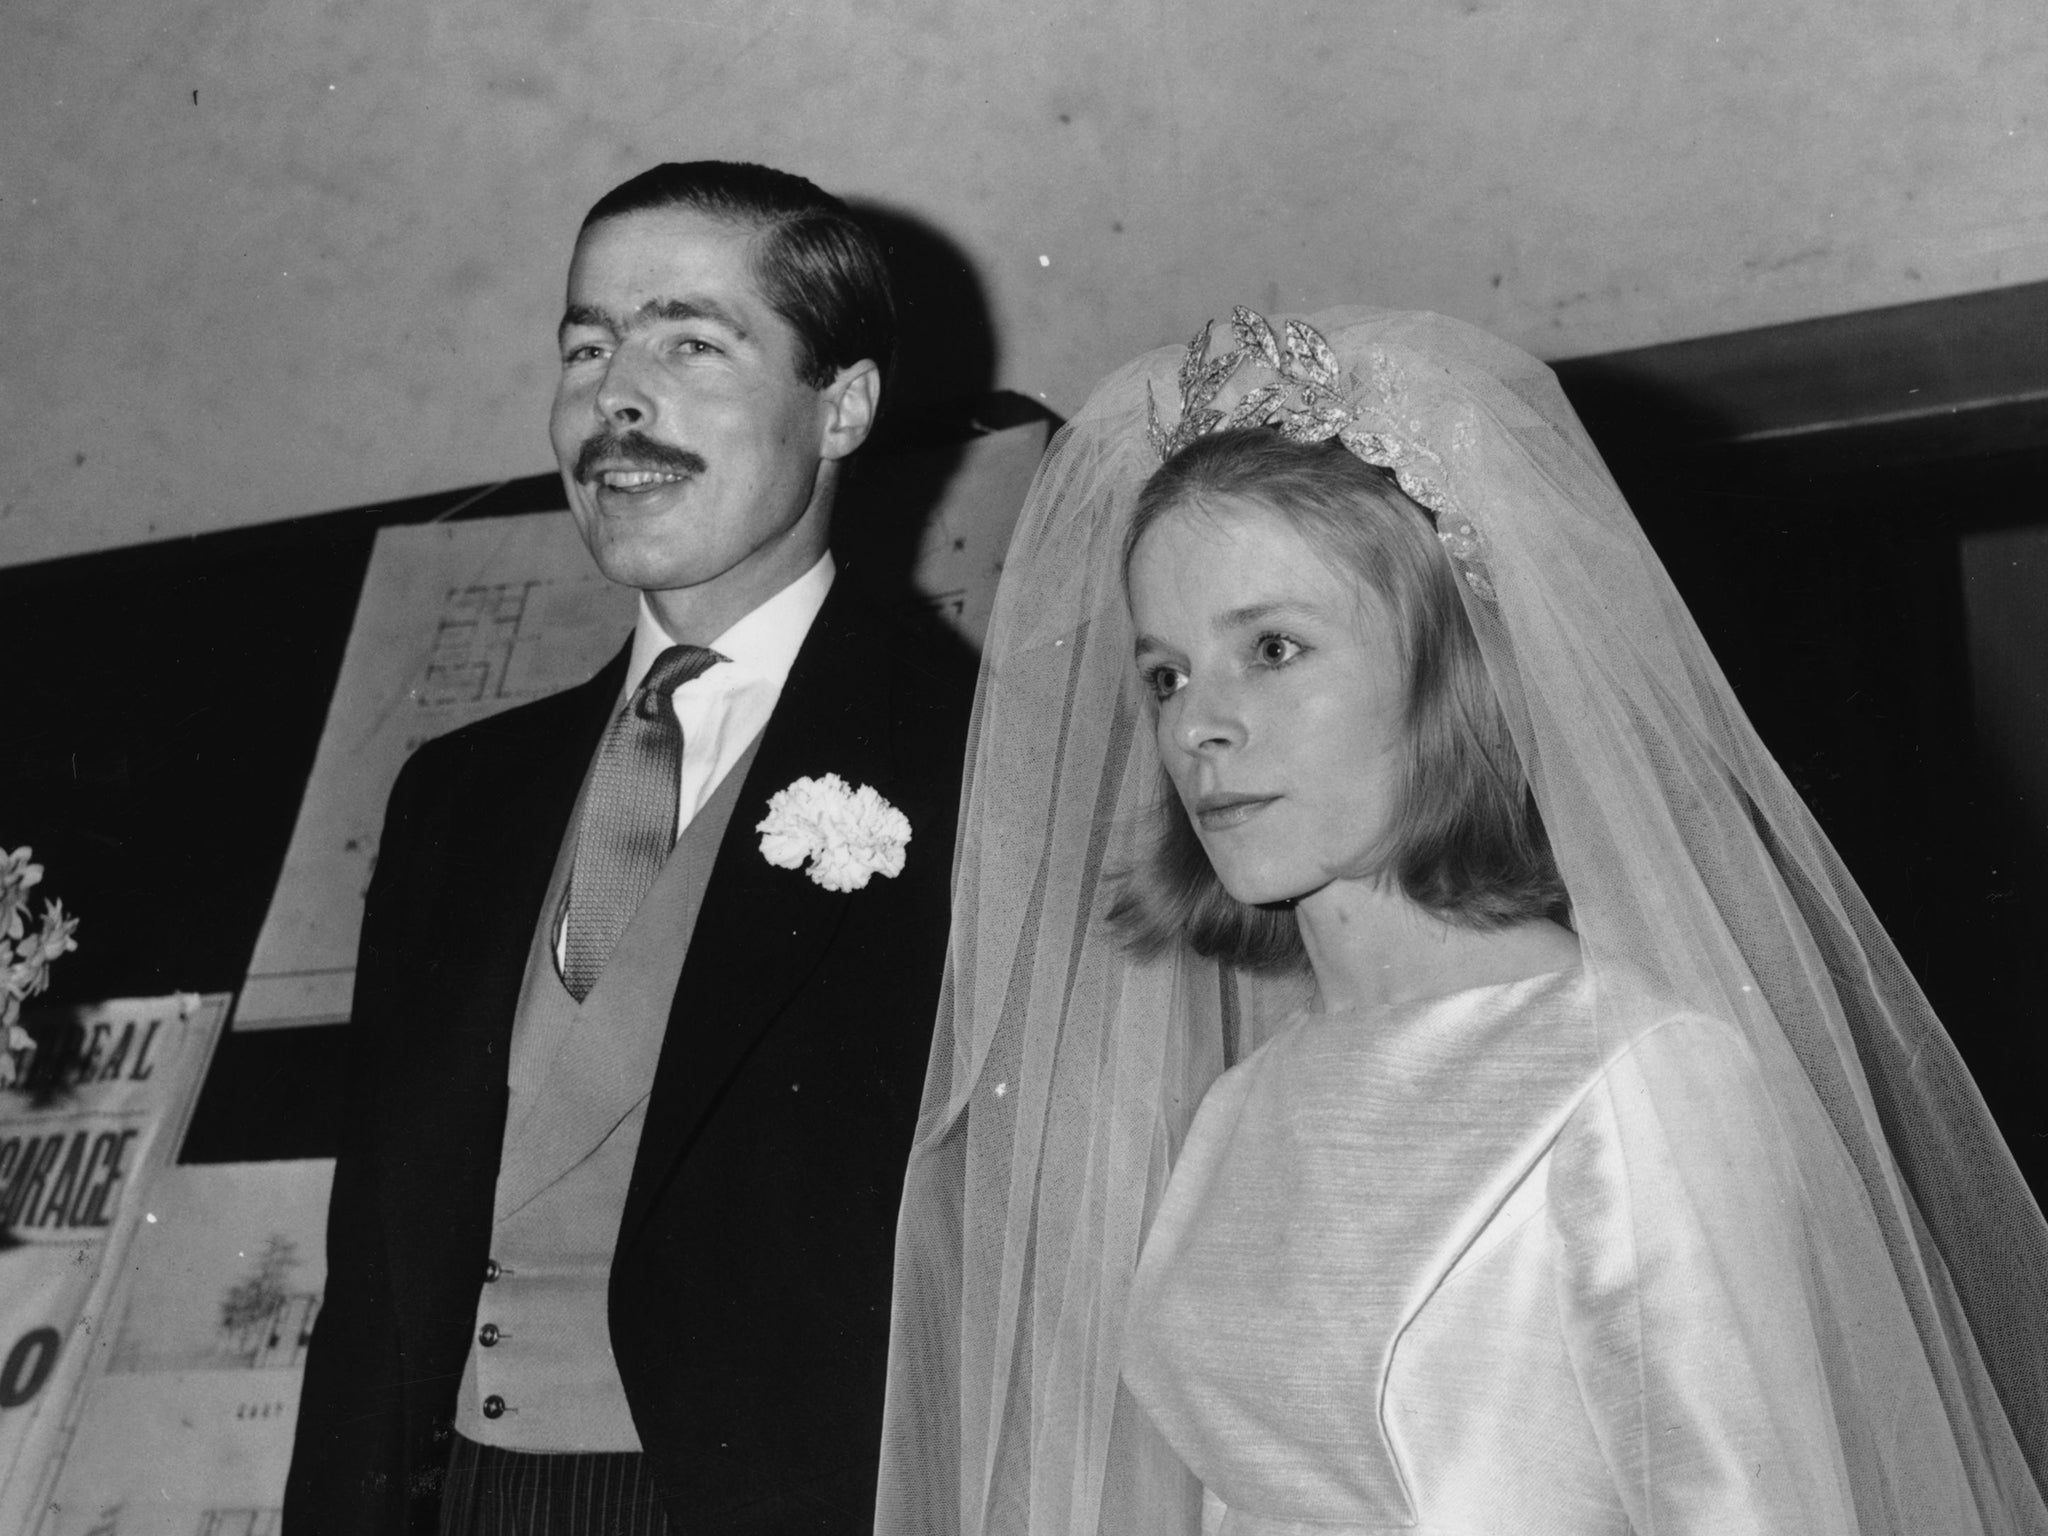 Lord Lucan disappeared in 1974 hours after his children’s nanny was found murdered at the family’s London home